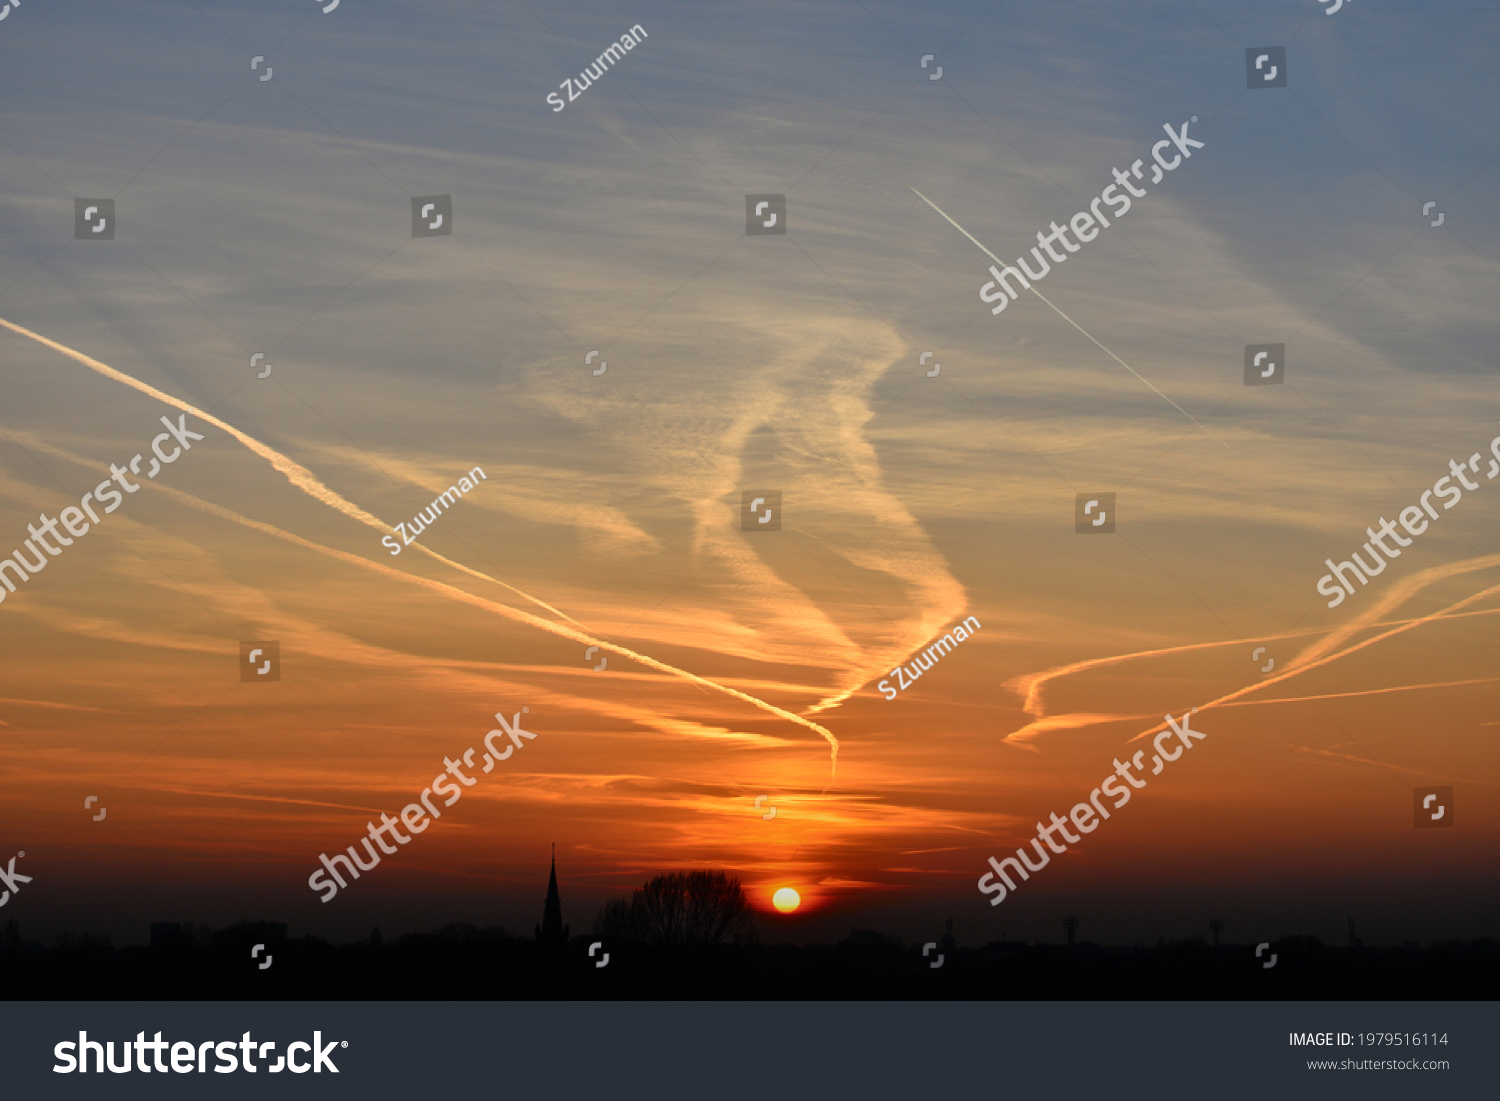 contrails in the sky at sunset due to engine exhaust produced by airplanes #1979516114